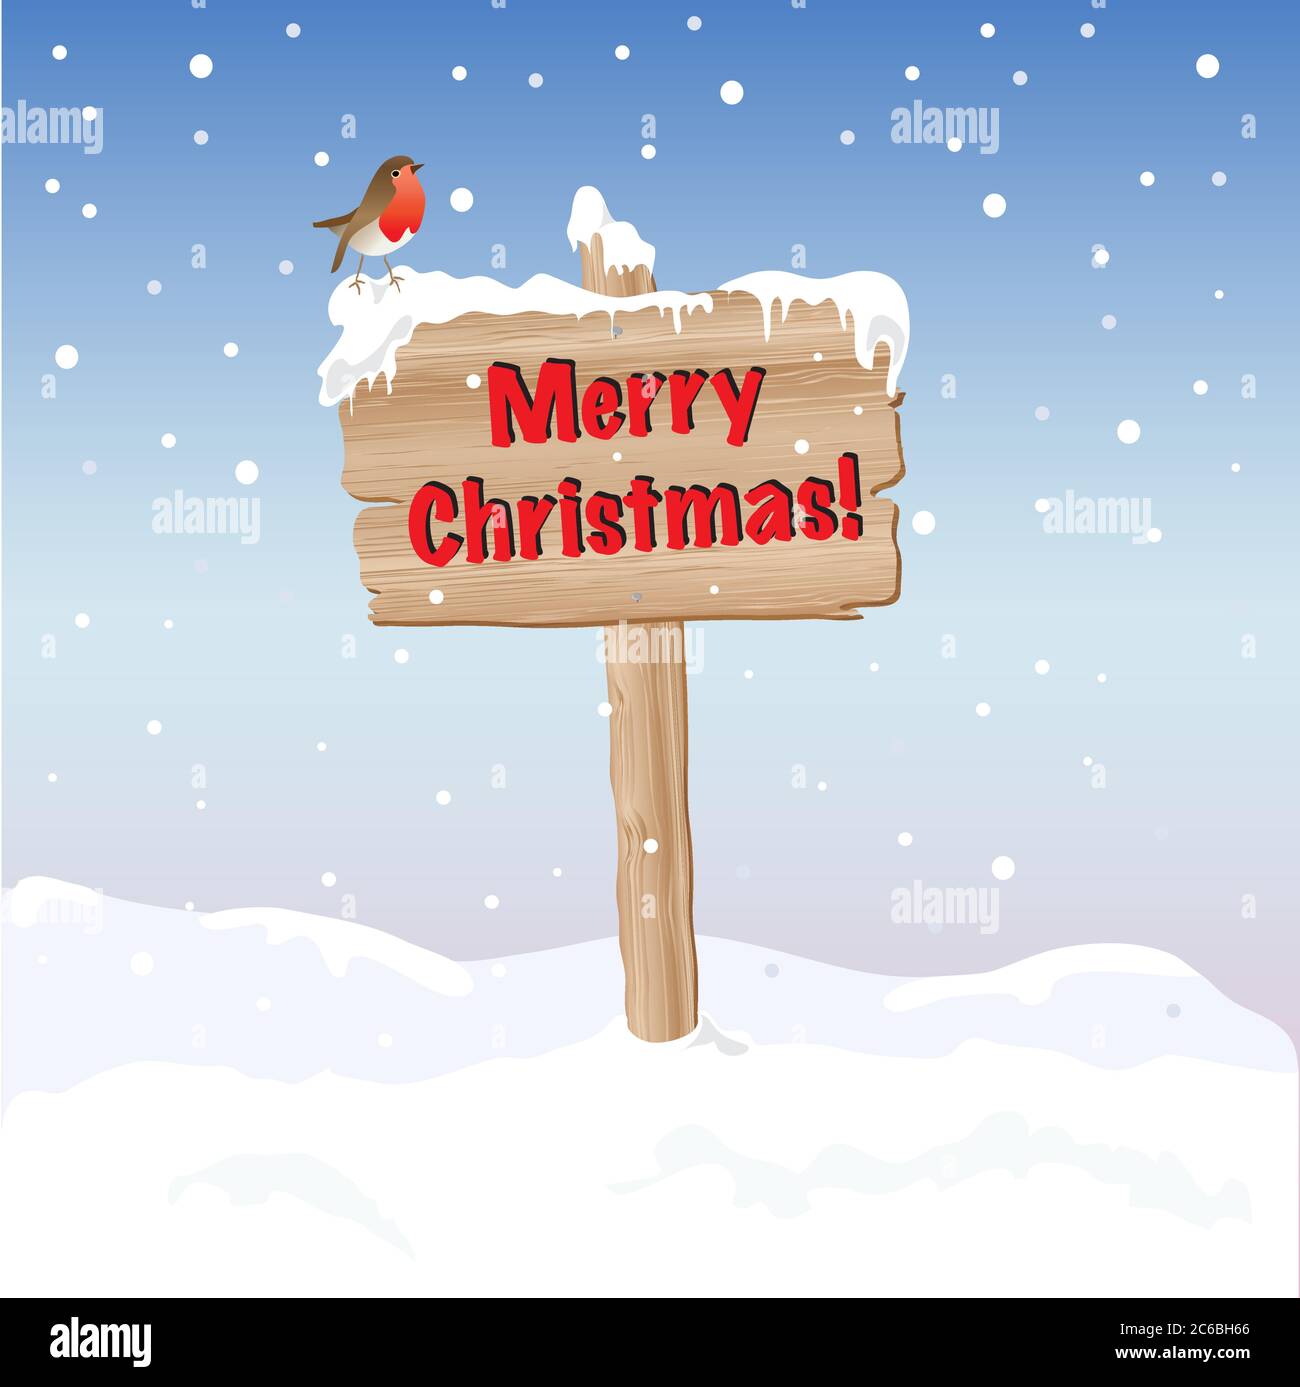 A wooden sign wishing Merry Christmas. EPS10 vector format. Fully editable for insertion of your own text. Stock Vector